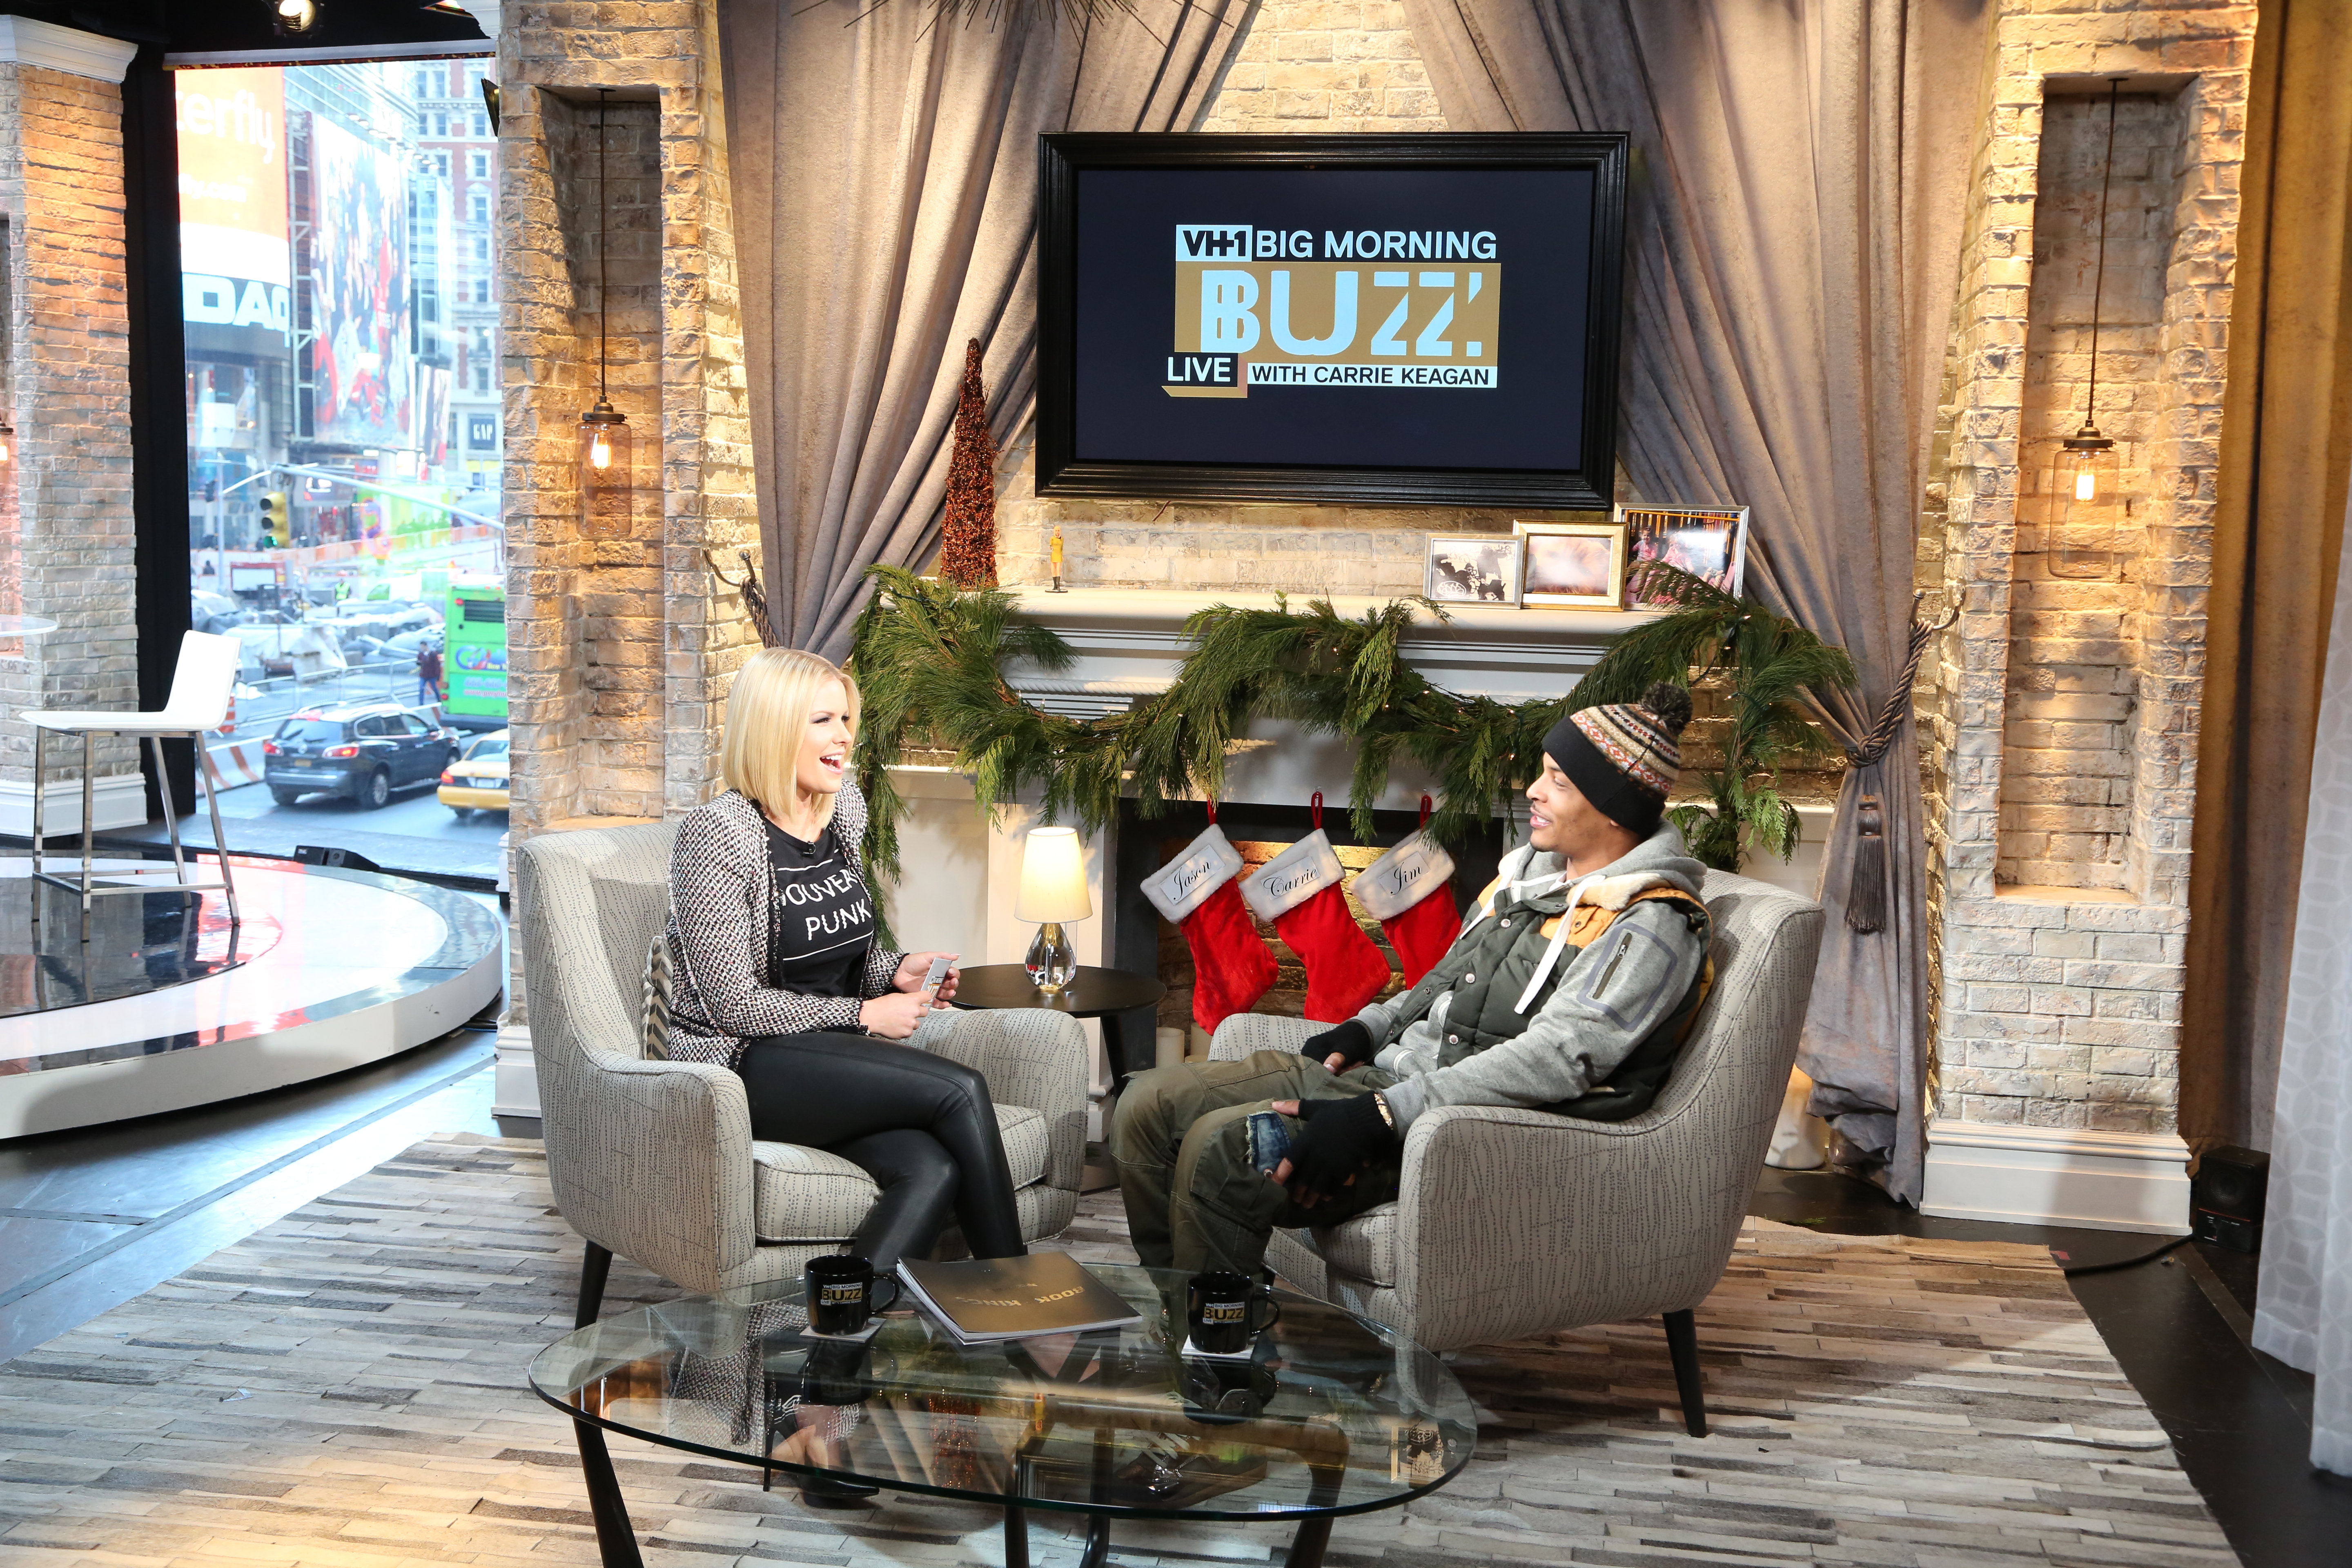 Carrie Keagan with T.I. on the set of VH1's Big Morning Buzz Live with Carrie Keagan